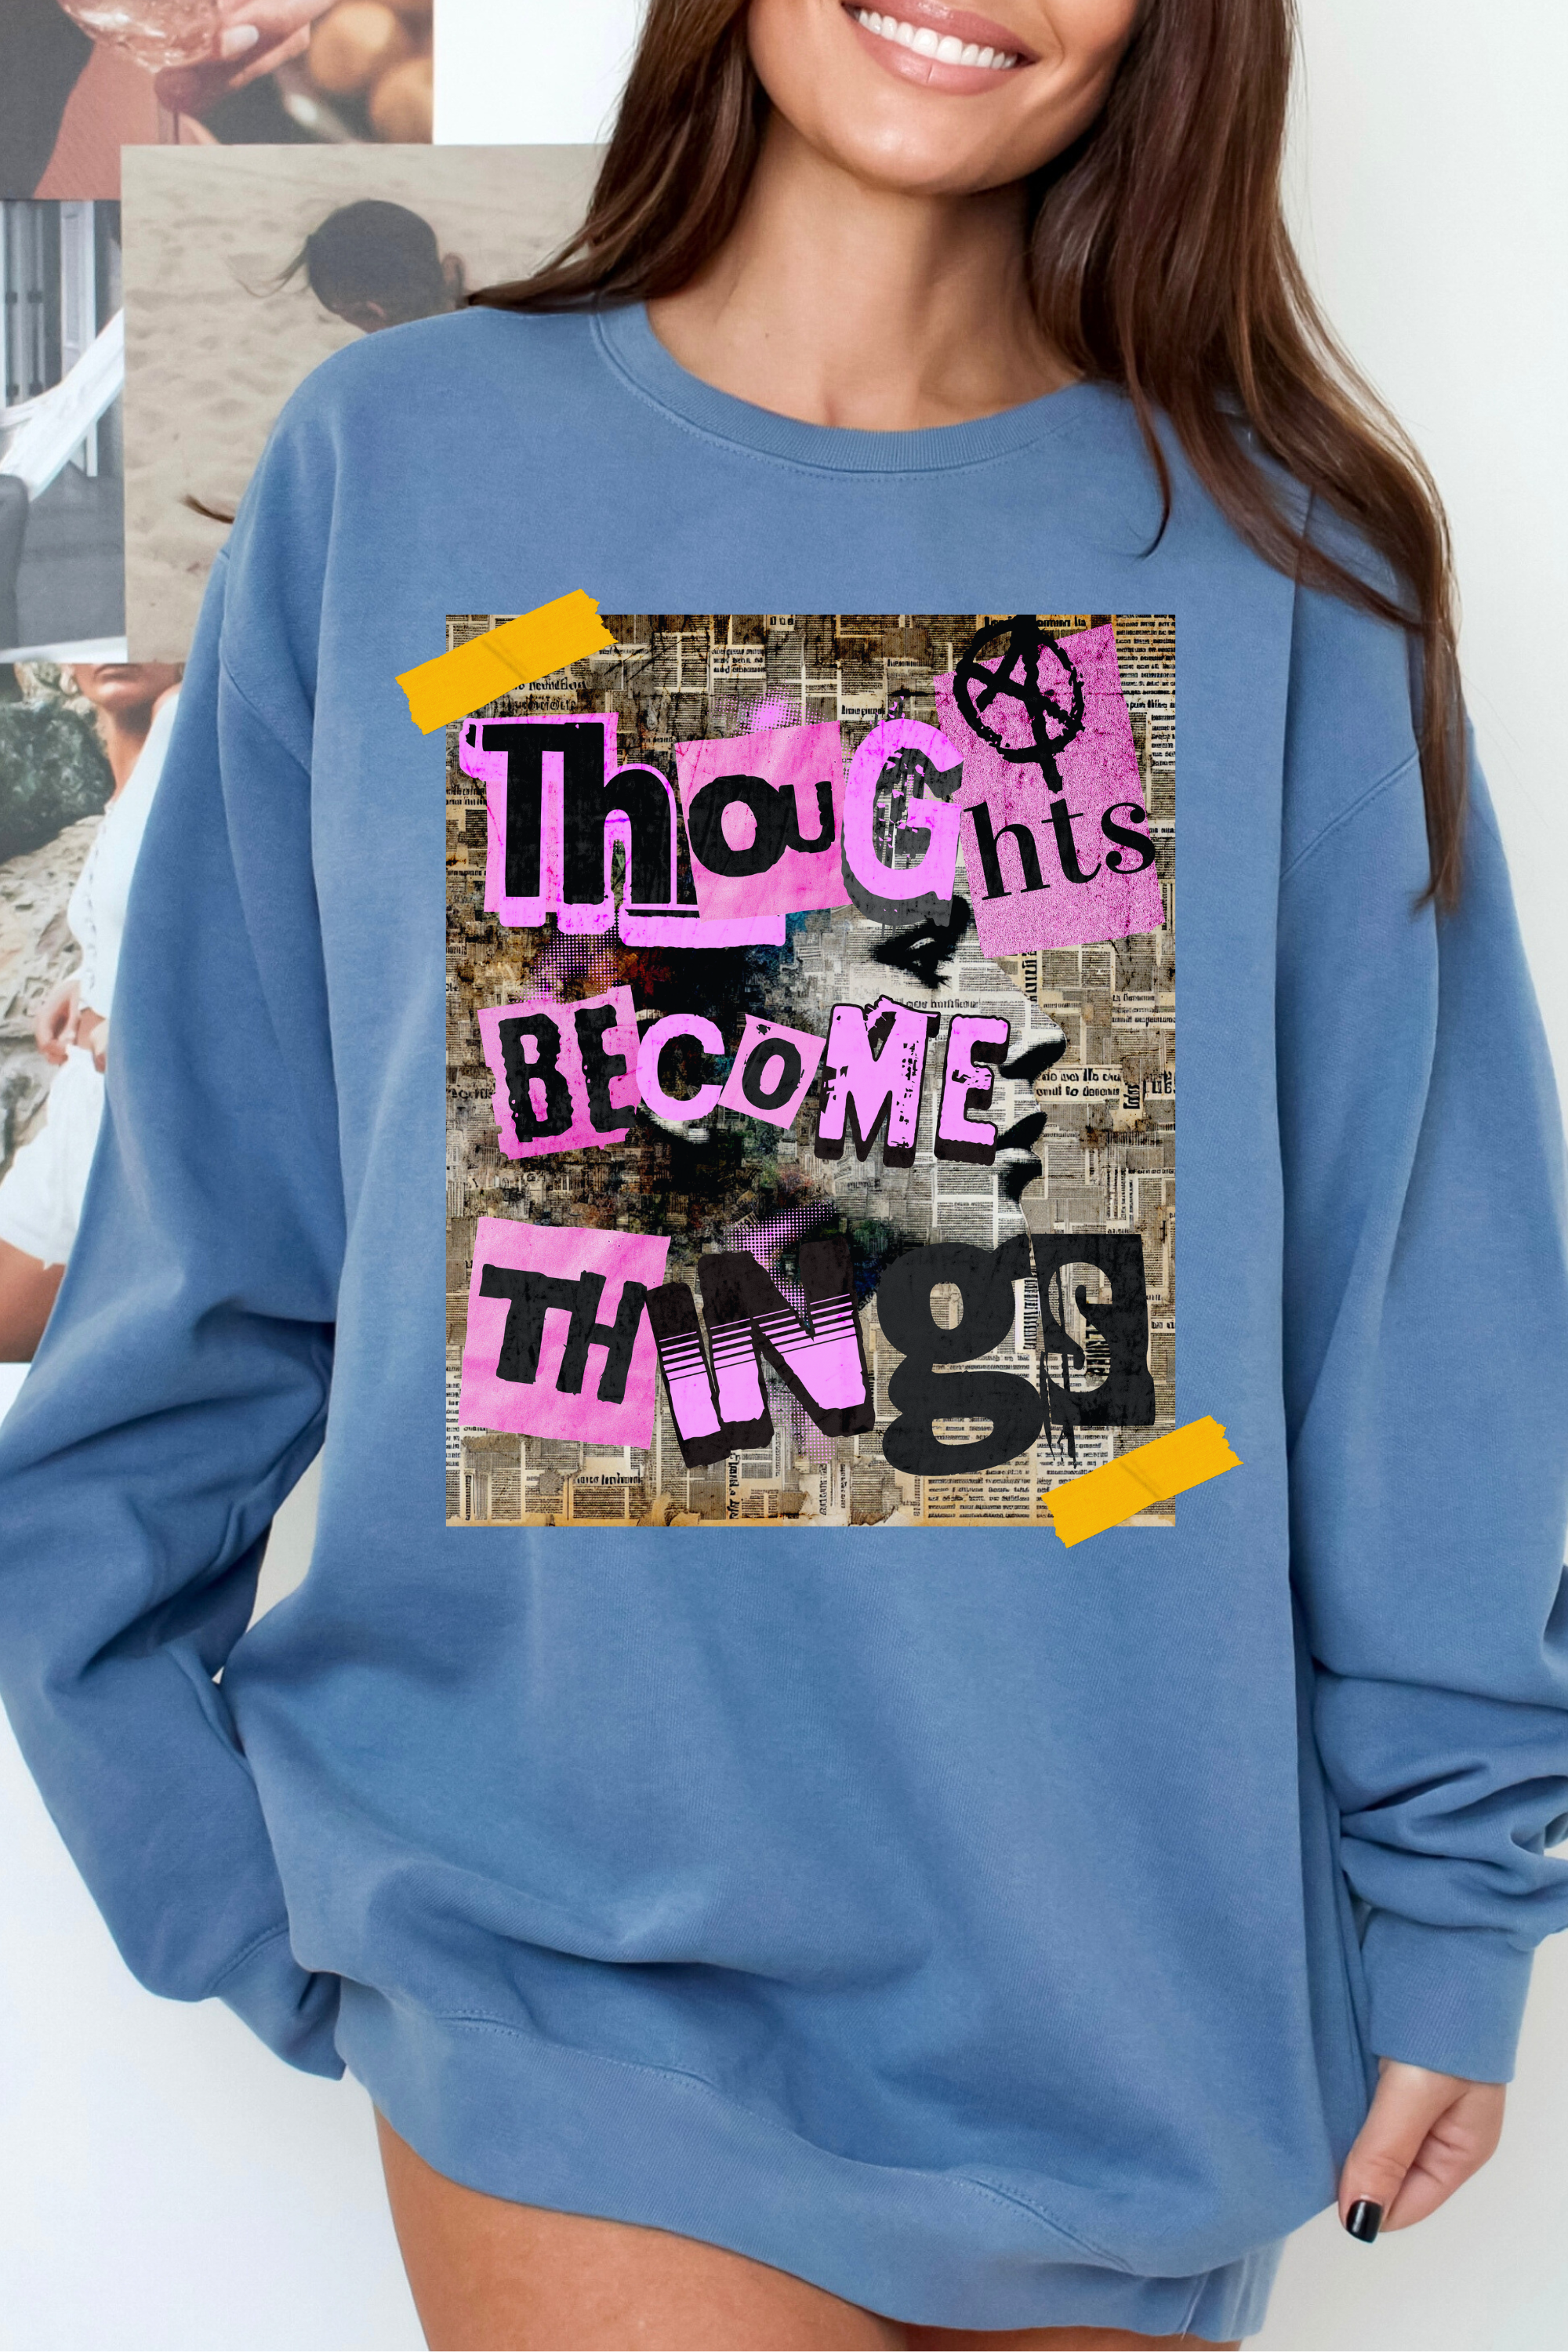 GOLDxTEAL's exclusive thoughts become things sweatshirt.